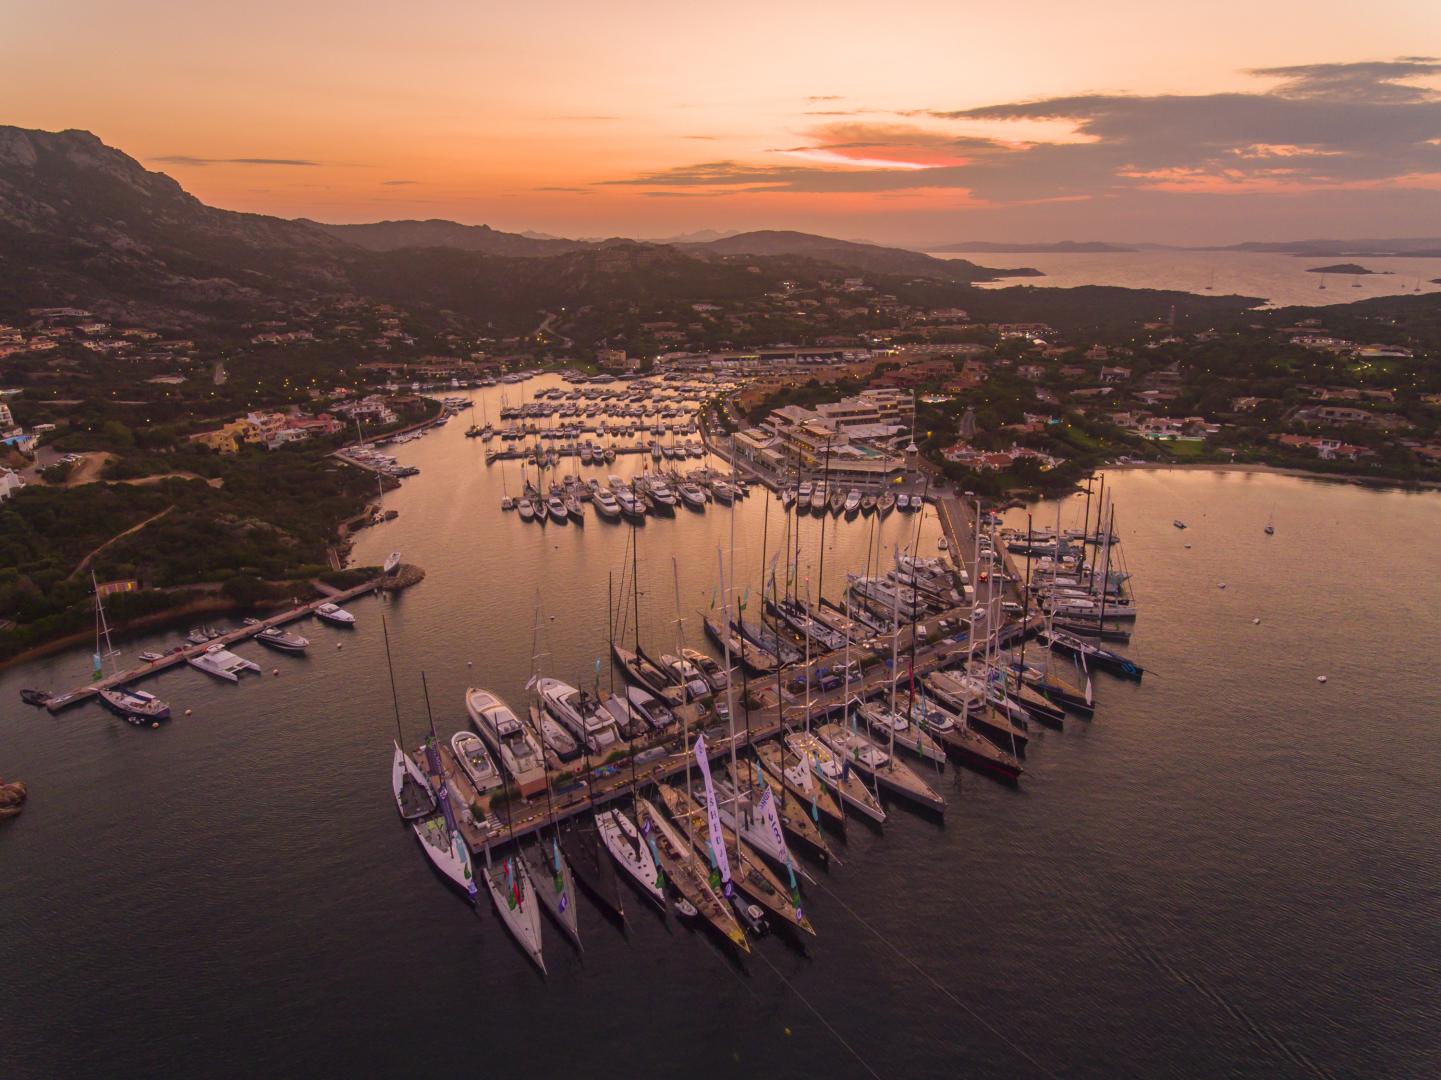 The Maxi Yacht Rolex Cup dock off the Yacht Club Costa Smeralda in 2019